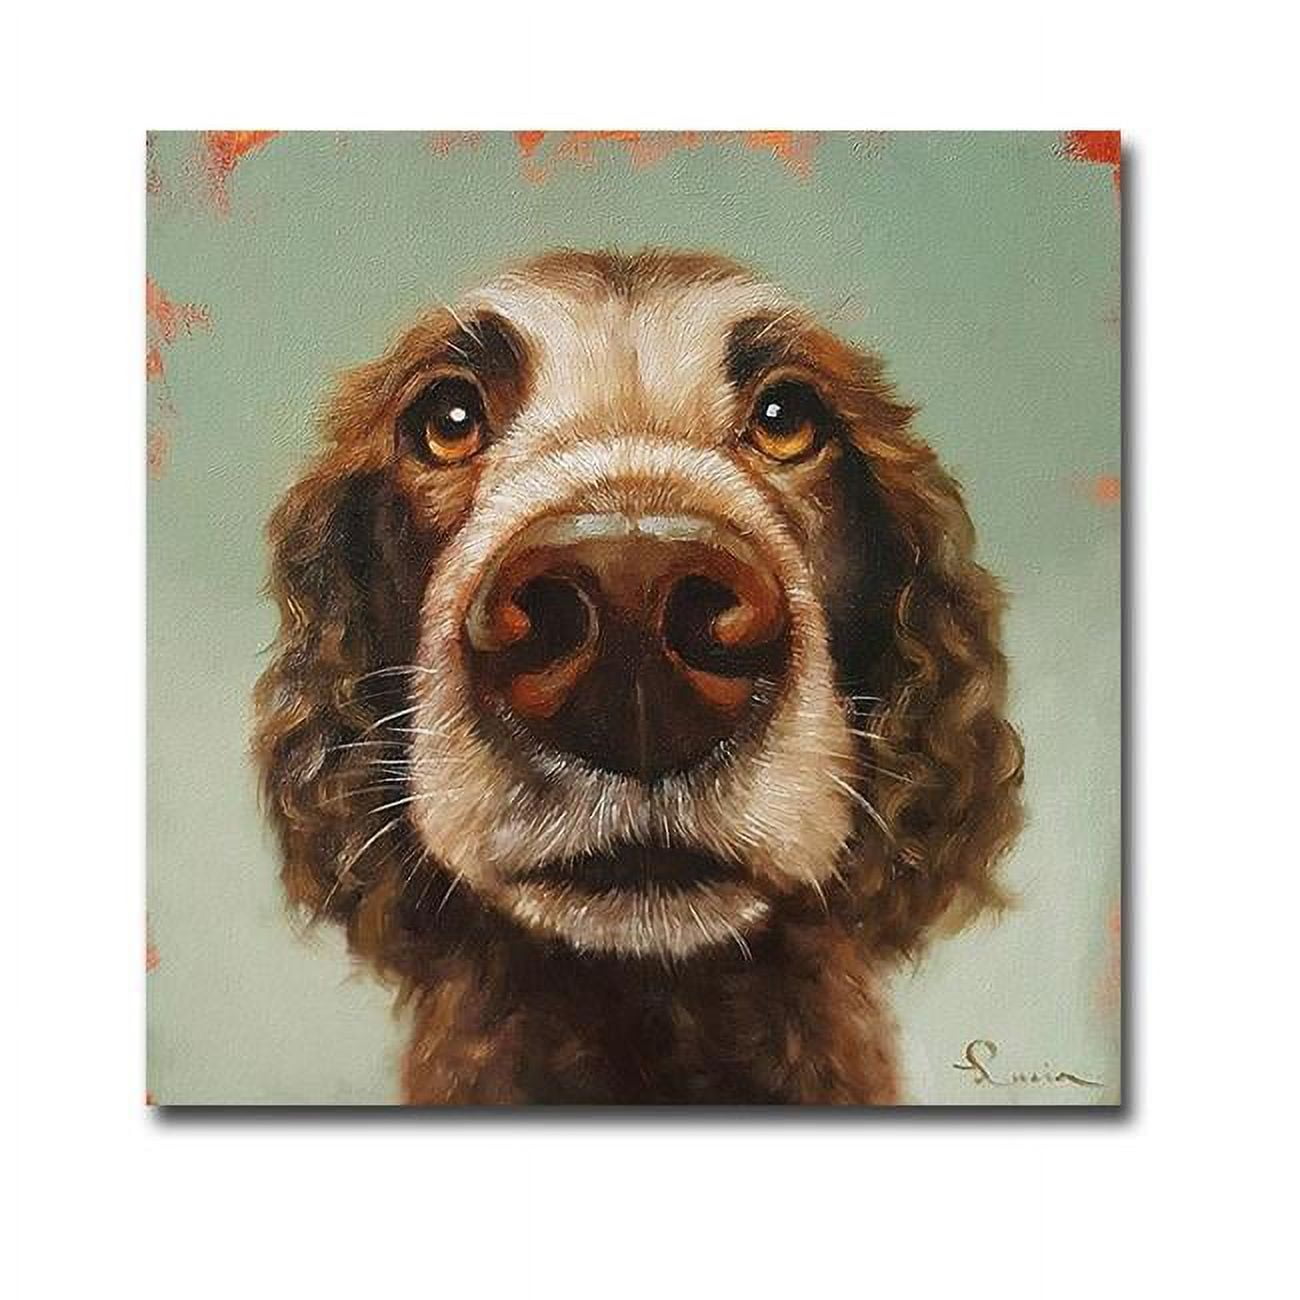 Picture of Artistic Home Gallery 1212K574G Follow Your Nose No.14 by Lucia Heffernan Premium Gallery-Wrapped Canvas Giclee Art - 12 x 12 x 1.5 in.